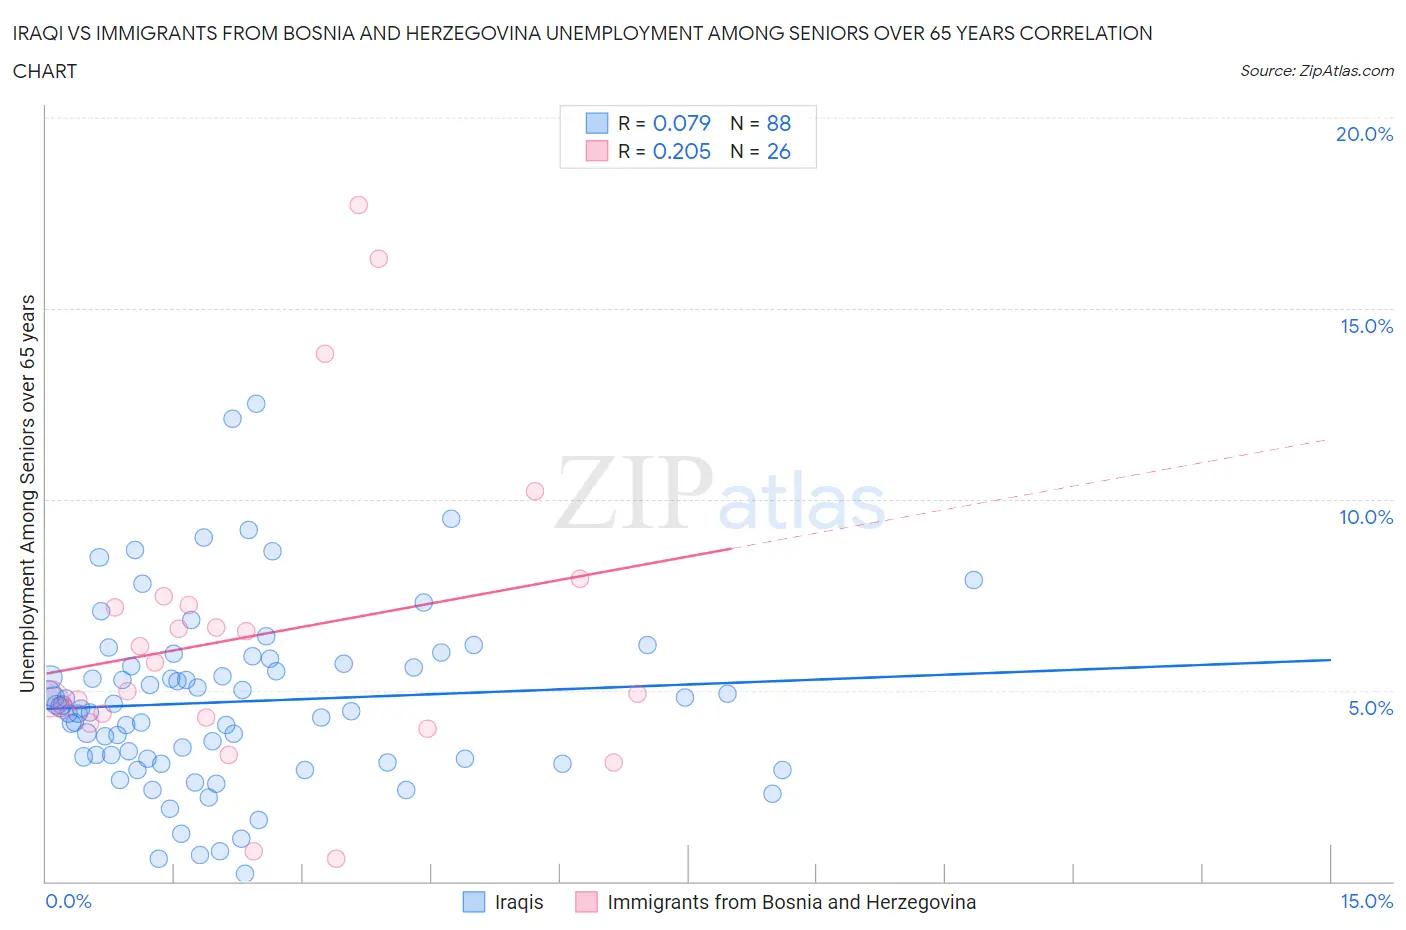 Iraqi vs Immigrants from Bosnia and Herzegovina Unemployment Among Seniors over 65 years